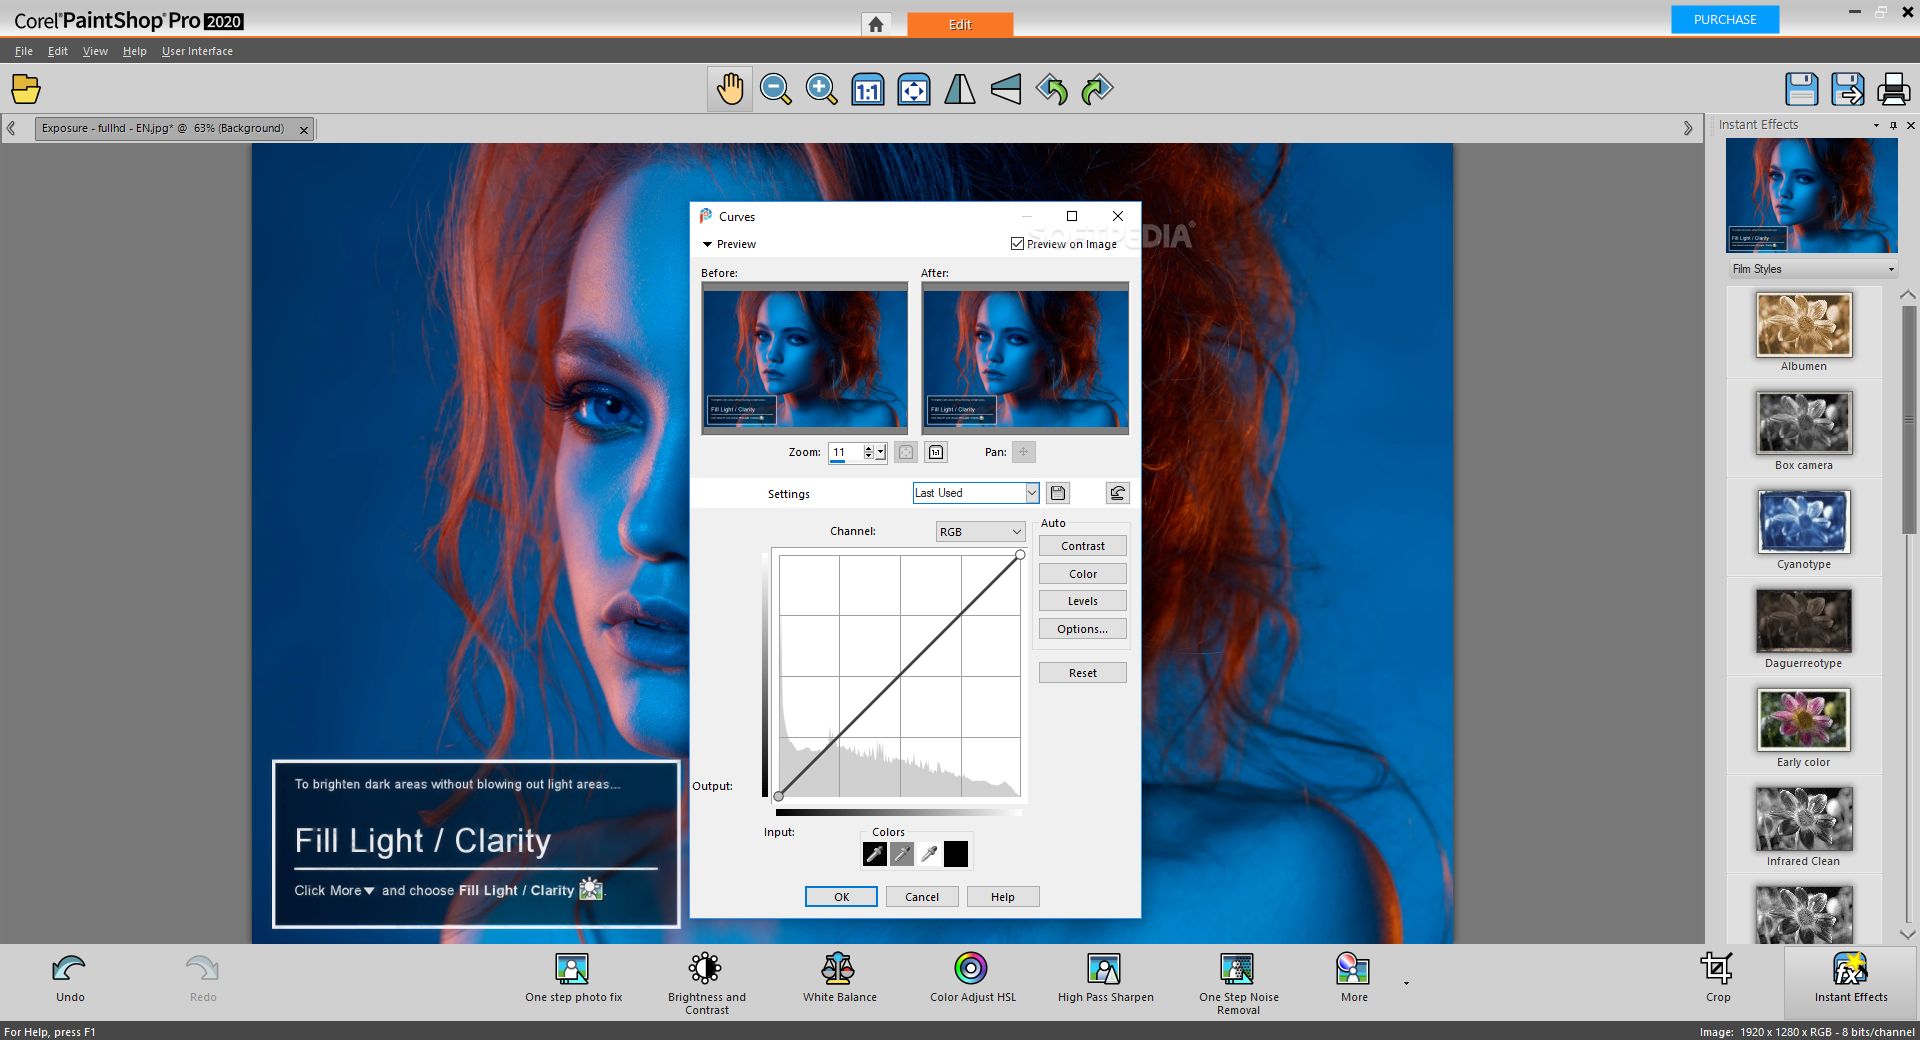 corel aftershot pro for mac closes immediately